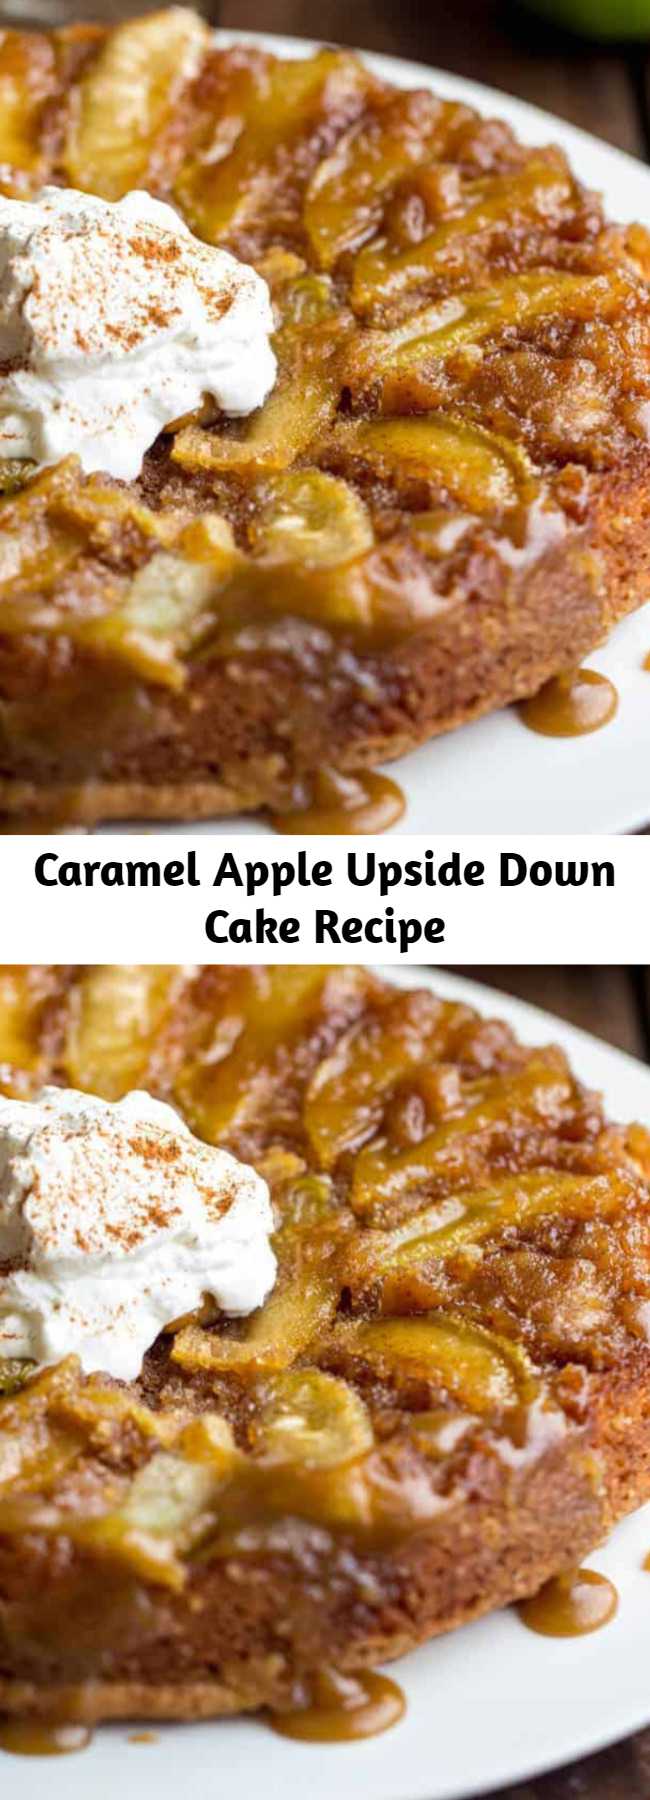 Caramel Apple Upside Down Cake Recipe - A delicious apple upside down cake that is perfectly moist and baked with apples with a brown sugar caramel glaze! This is one of the best cakes ever!